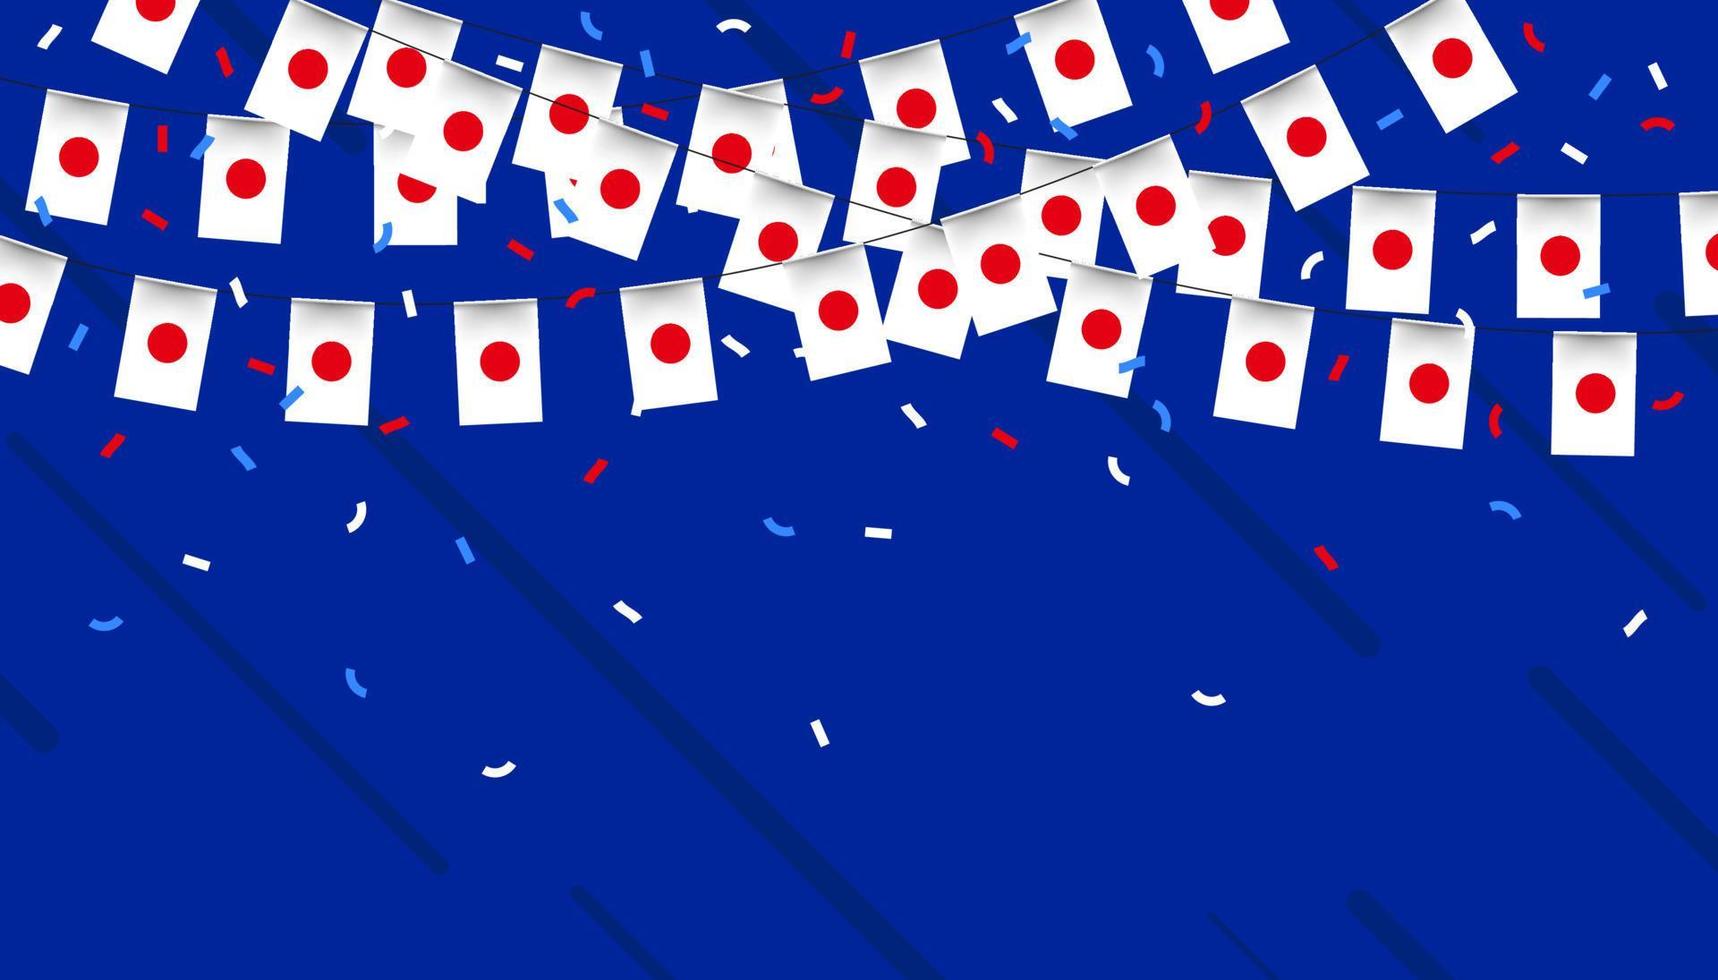 Japan celebration bunting flags with confetti and ribbons on blue background. vector illustration.